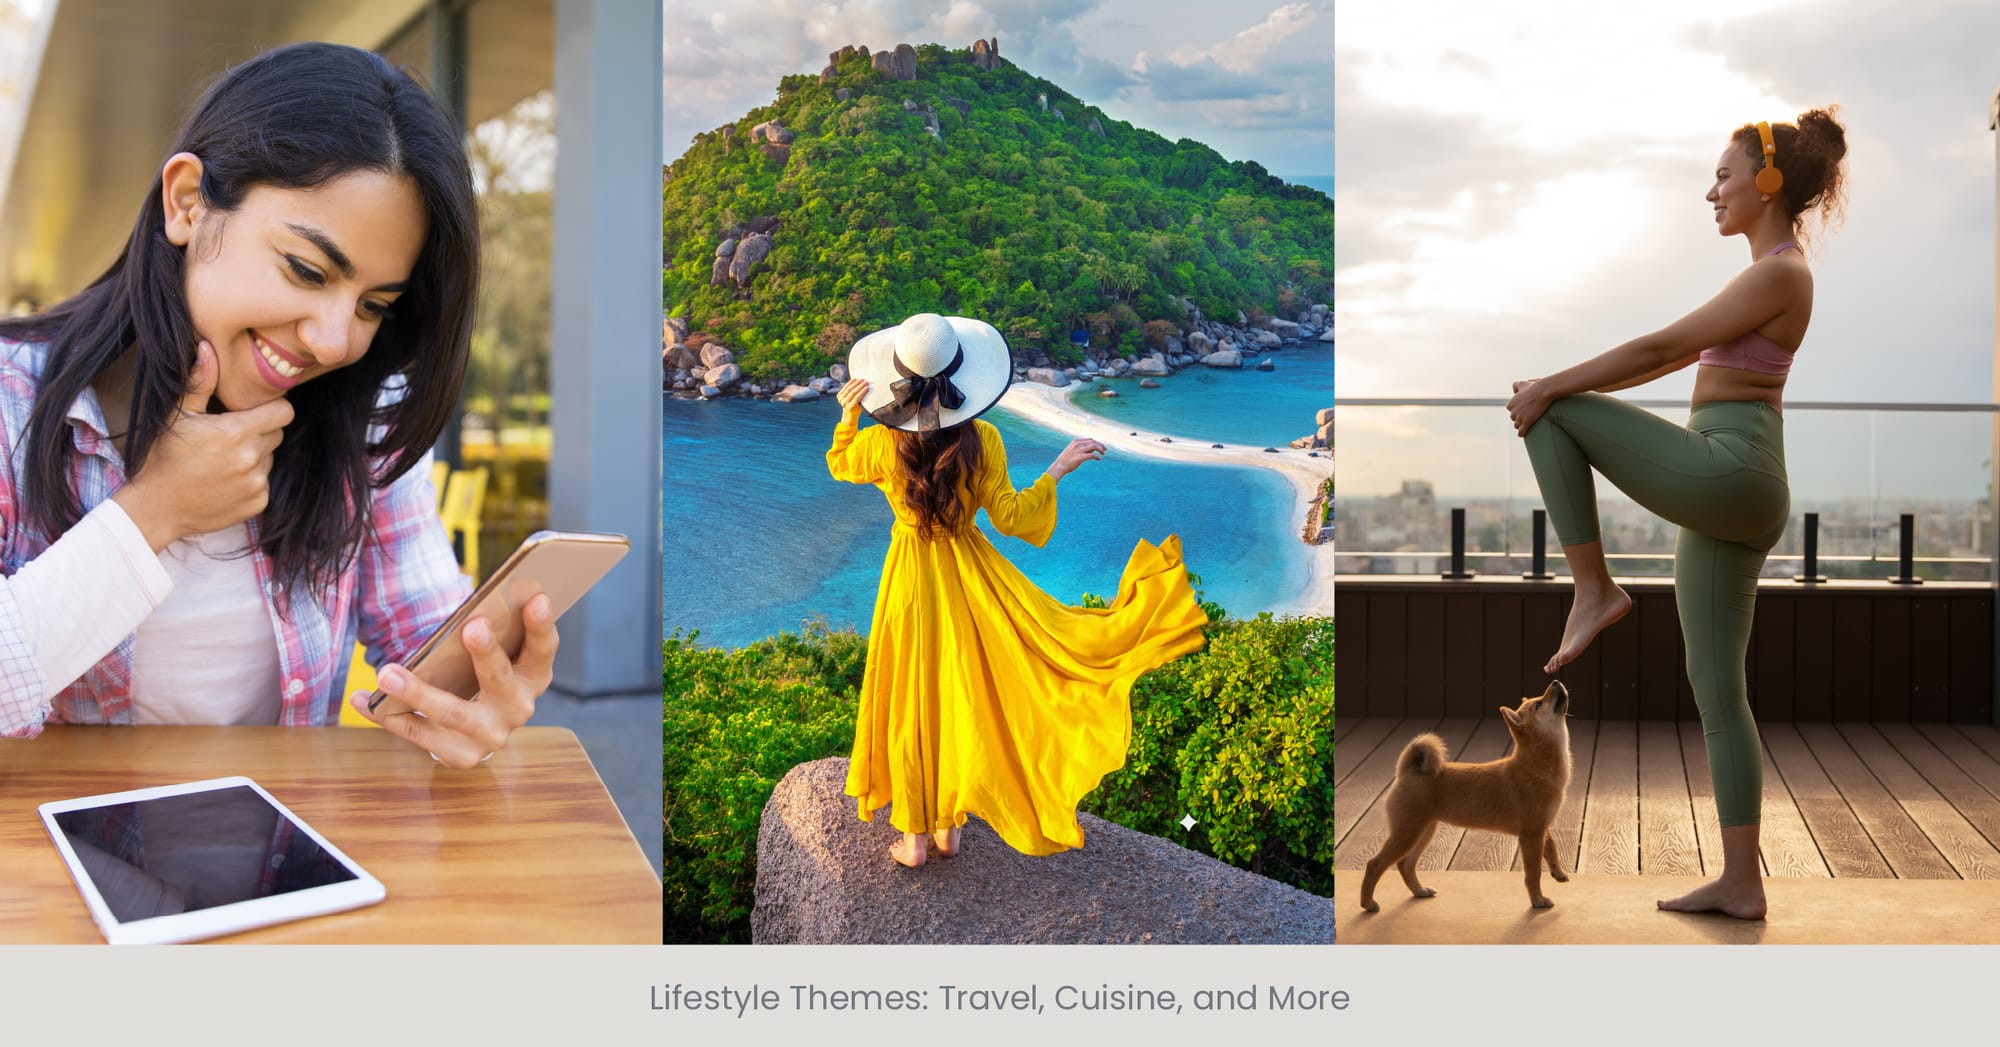 Lifestyle Themes: Travel, Cuisine, and More